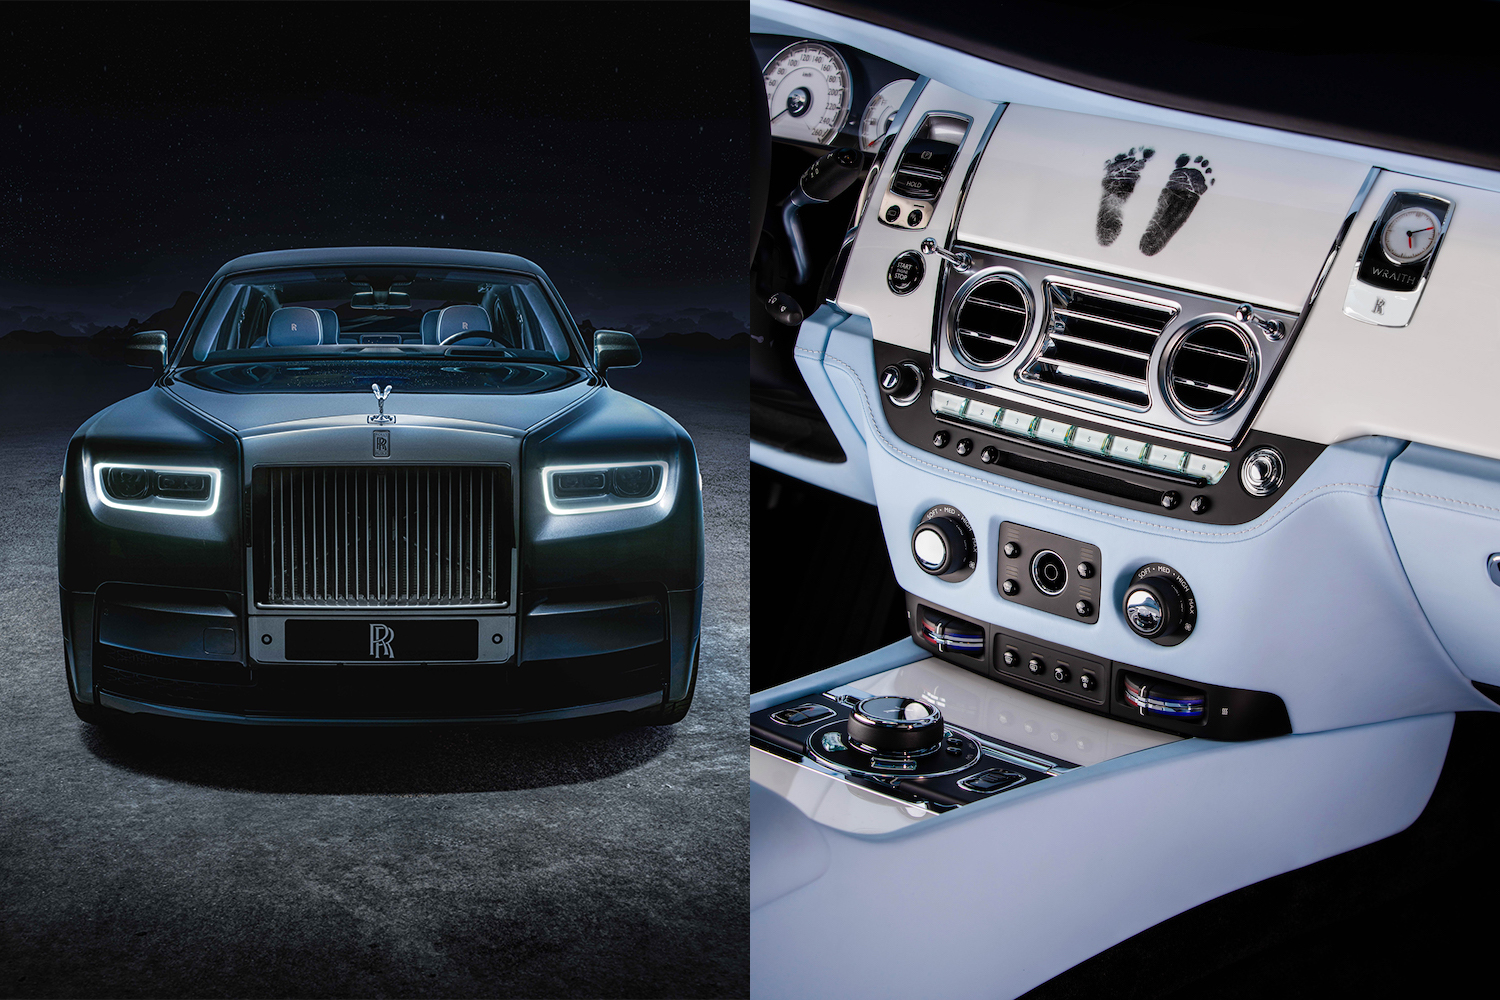 Left: The front of a Rolls-Royce Phantom Tempus, a bespoke car that features paint that incorporates jewel-like blue mica flakes, which glitter and glint as they catch the light, representing the stars. Right: The piano white dashboard of a Rolls-Royce featuring the footprints of a baby girl.